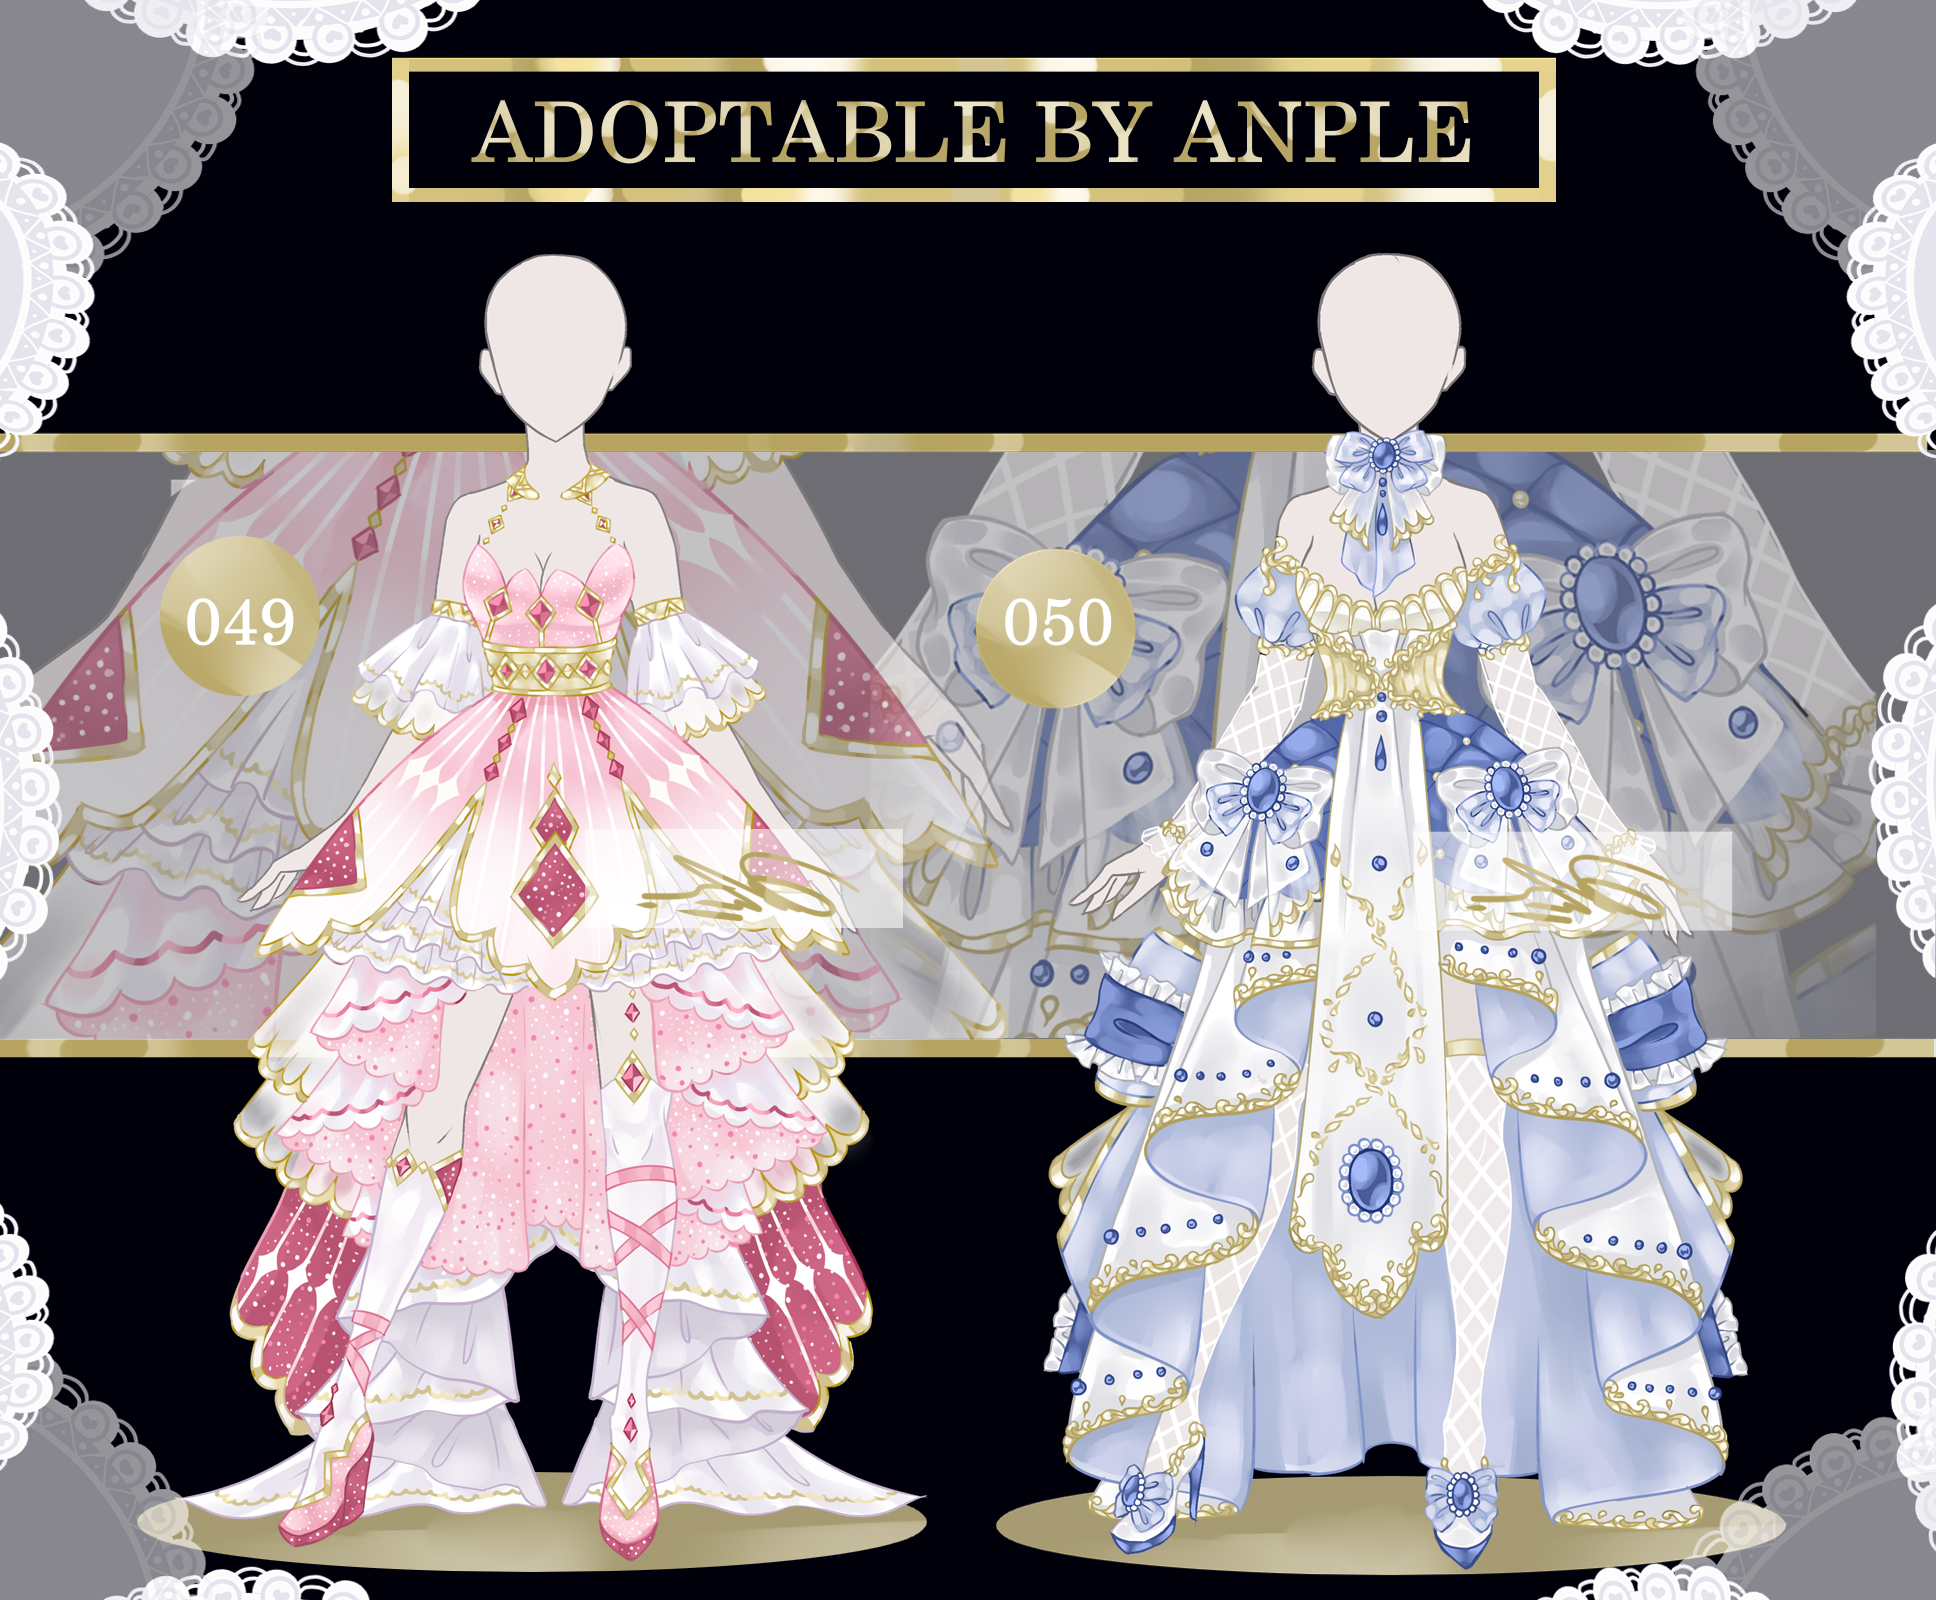 Outfits [CLOSED] Reauction 049 - 050 by AnpleOR on DeviantArt